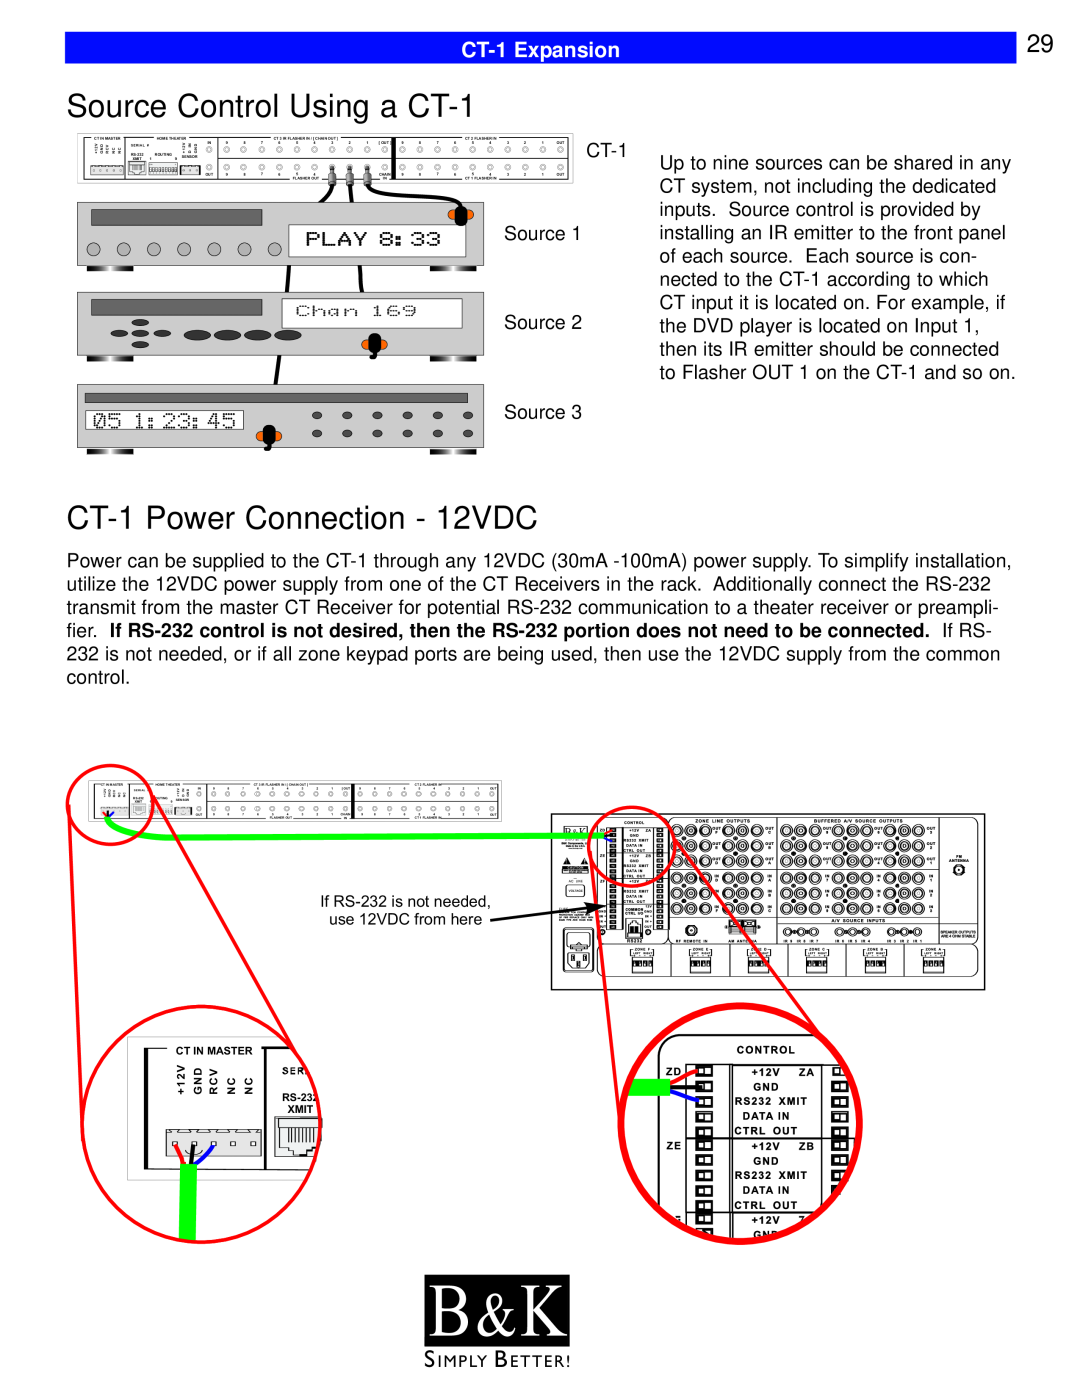 B&K CT610, CT600, CT602, CT310, CT300 Source Control Using a CT-1, CT-1Power Connection - 12VDC, B & K, CT-1Expansion 